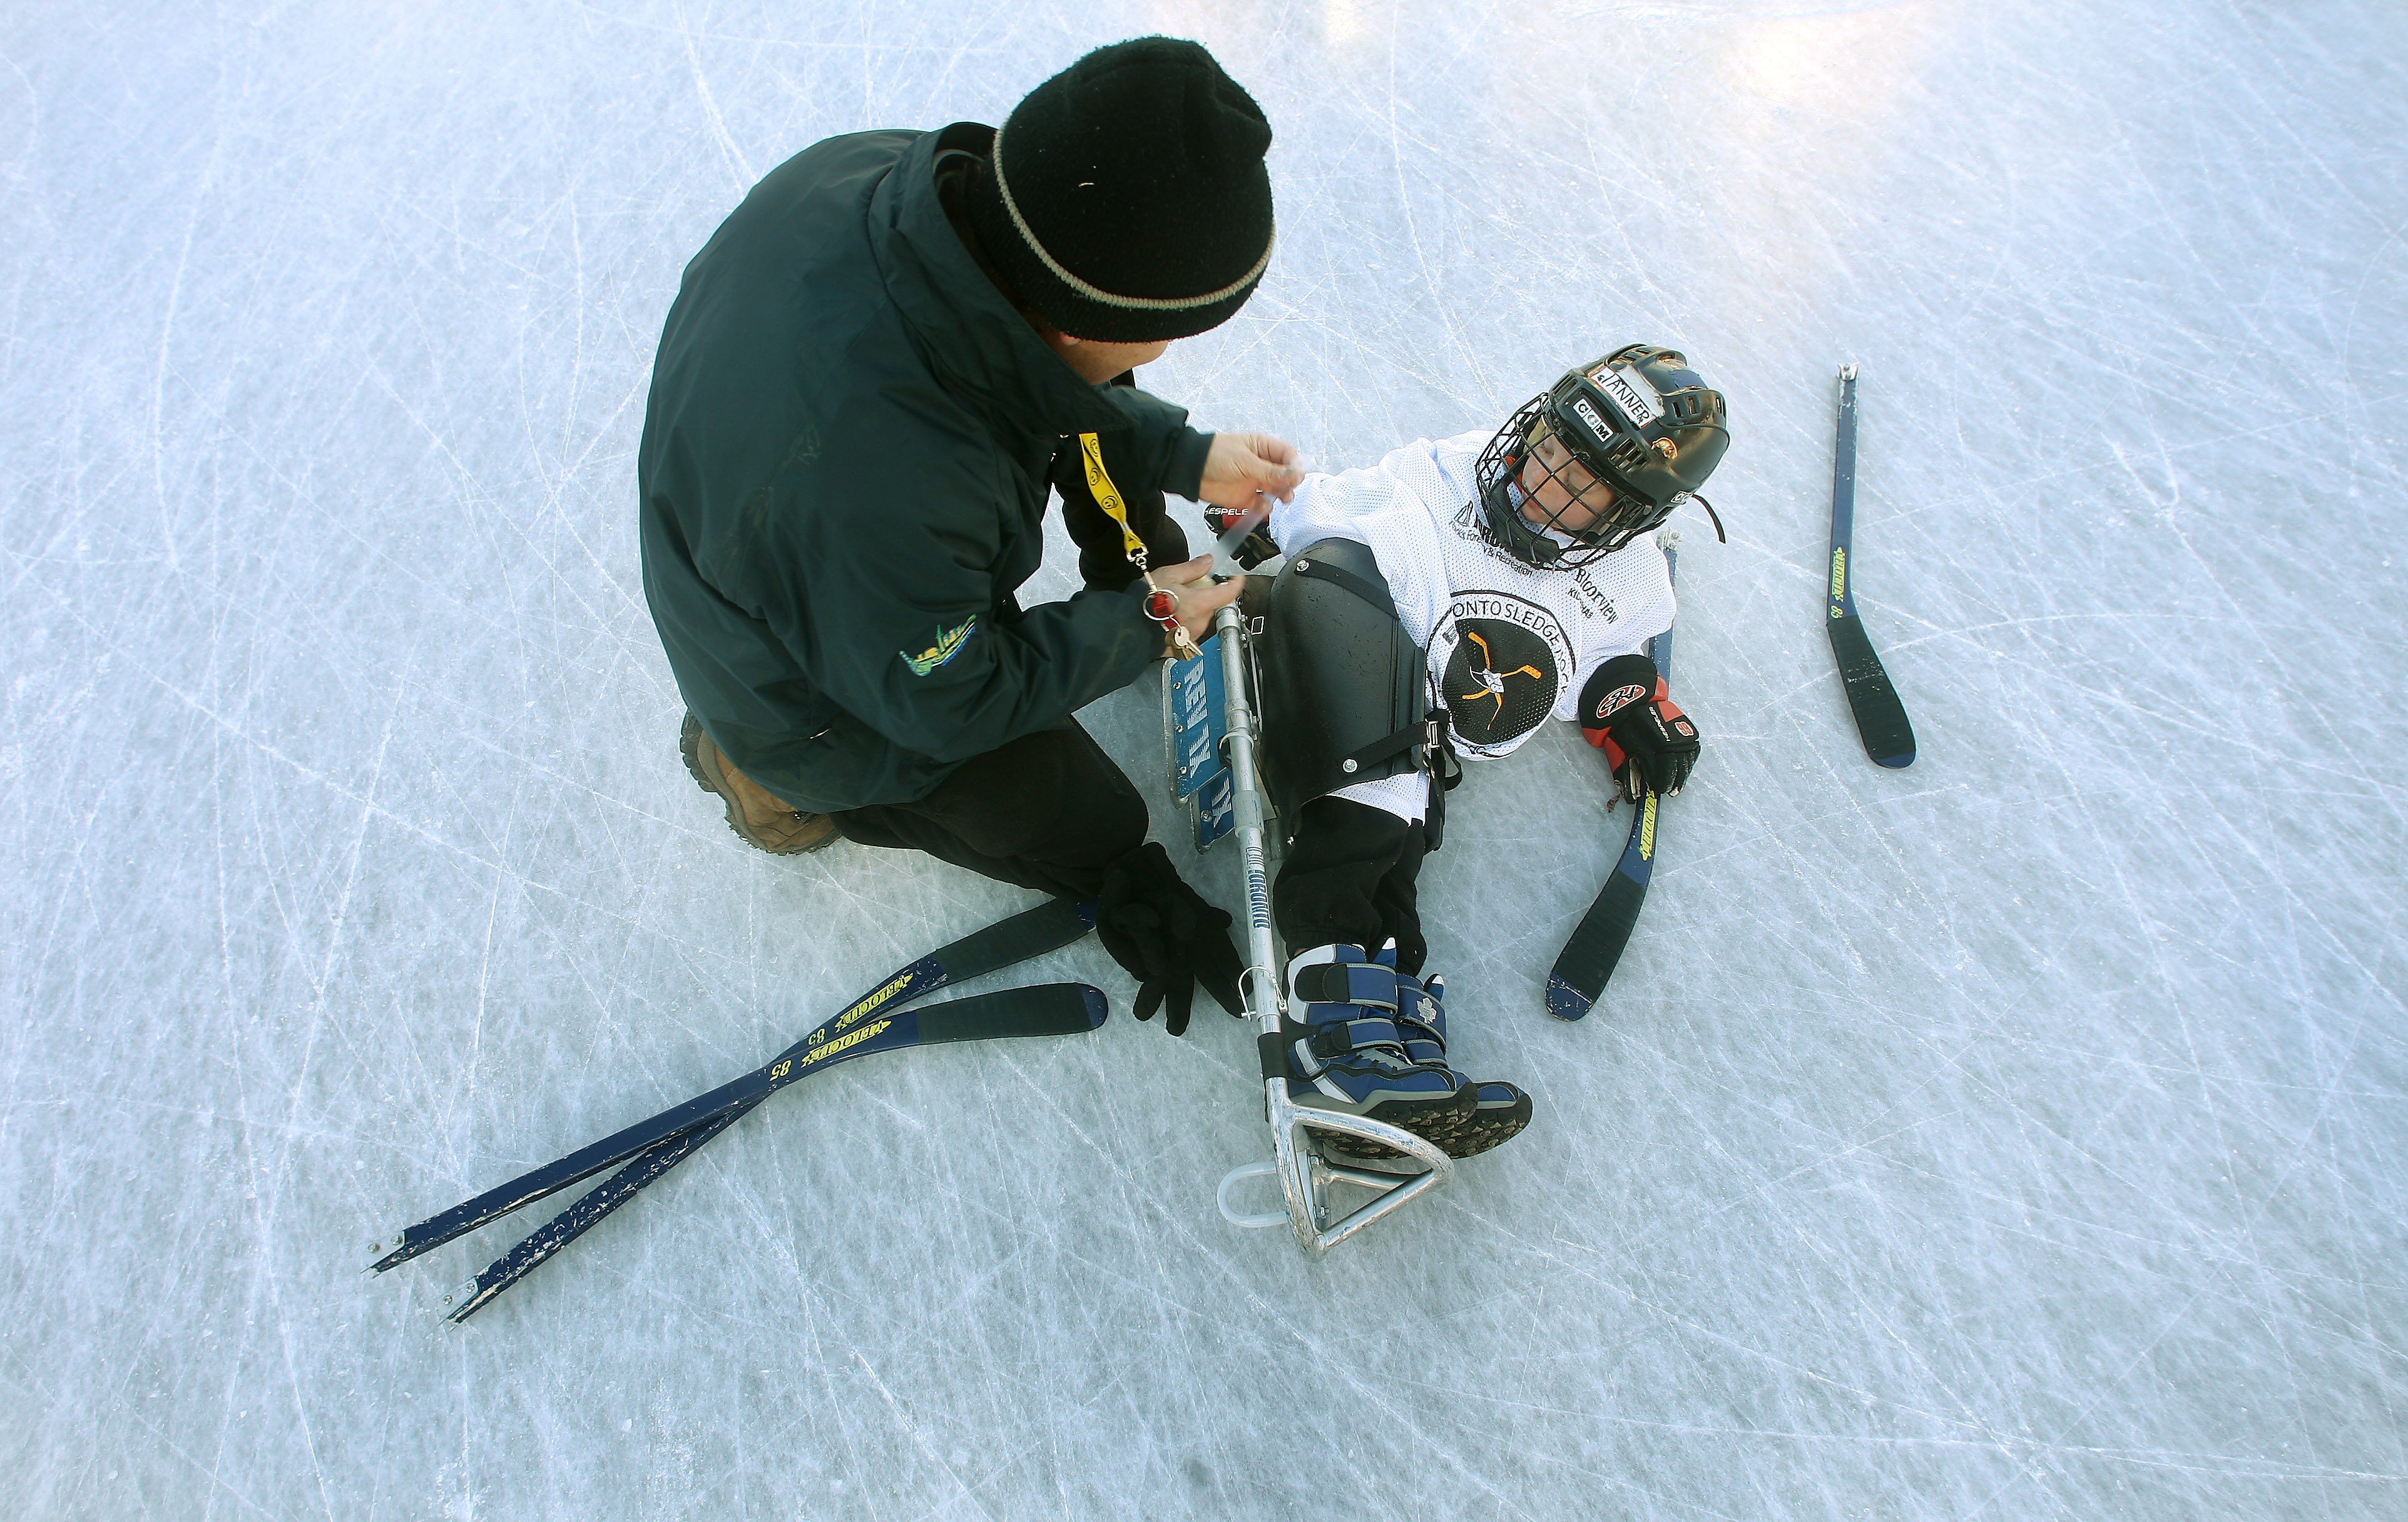 Jake's father got him equipped with the Paralympian sledges, and soon, he was playing on the ice with one of his hockey idols | Source: Getty Images